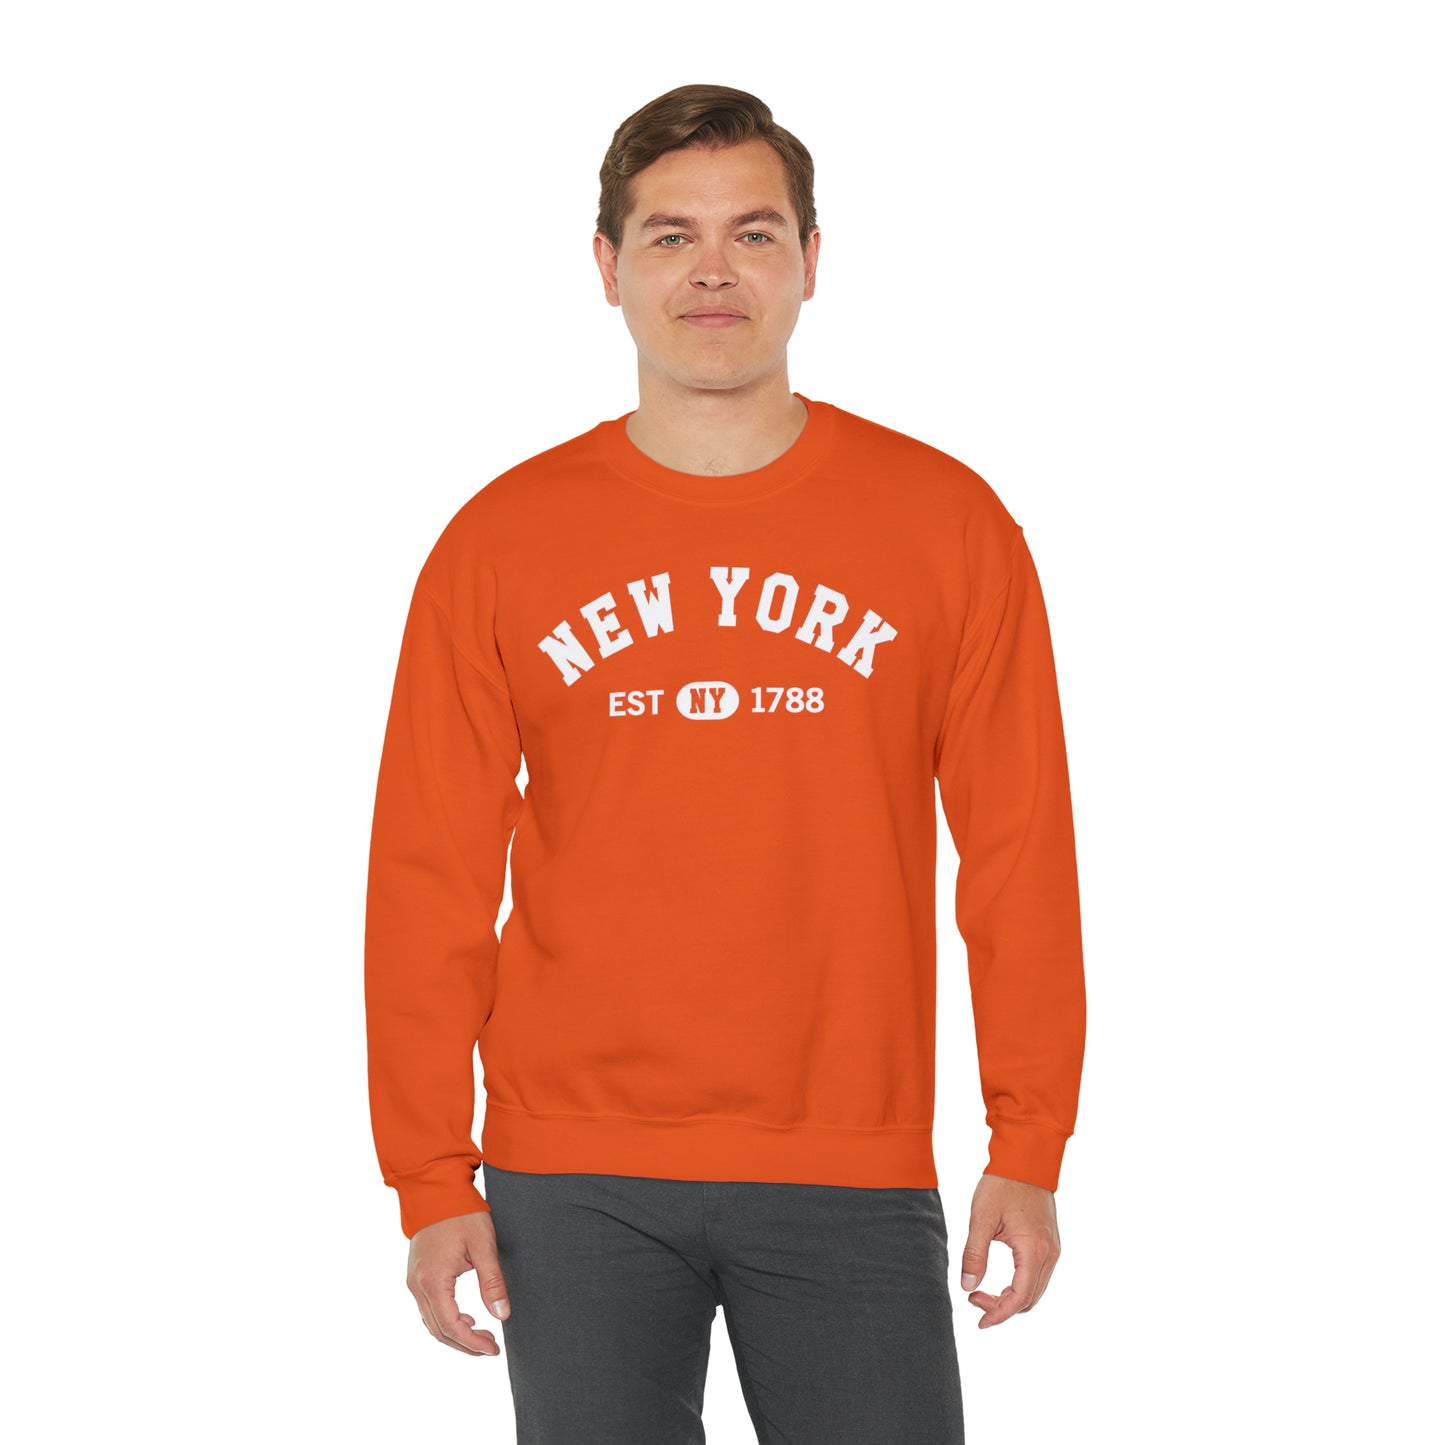 NY New York State Sweatshirt, I Love NY Vintage Graphic USA American Crewneck Sports Sweater Jumper Pullover Men Women Top